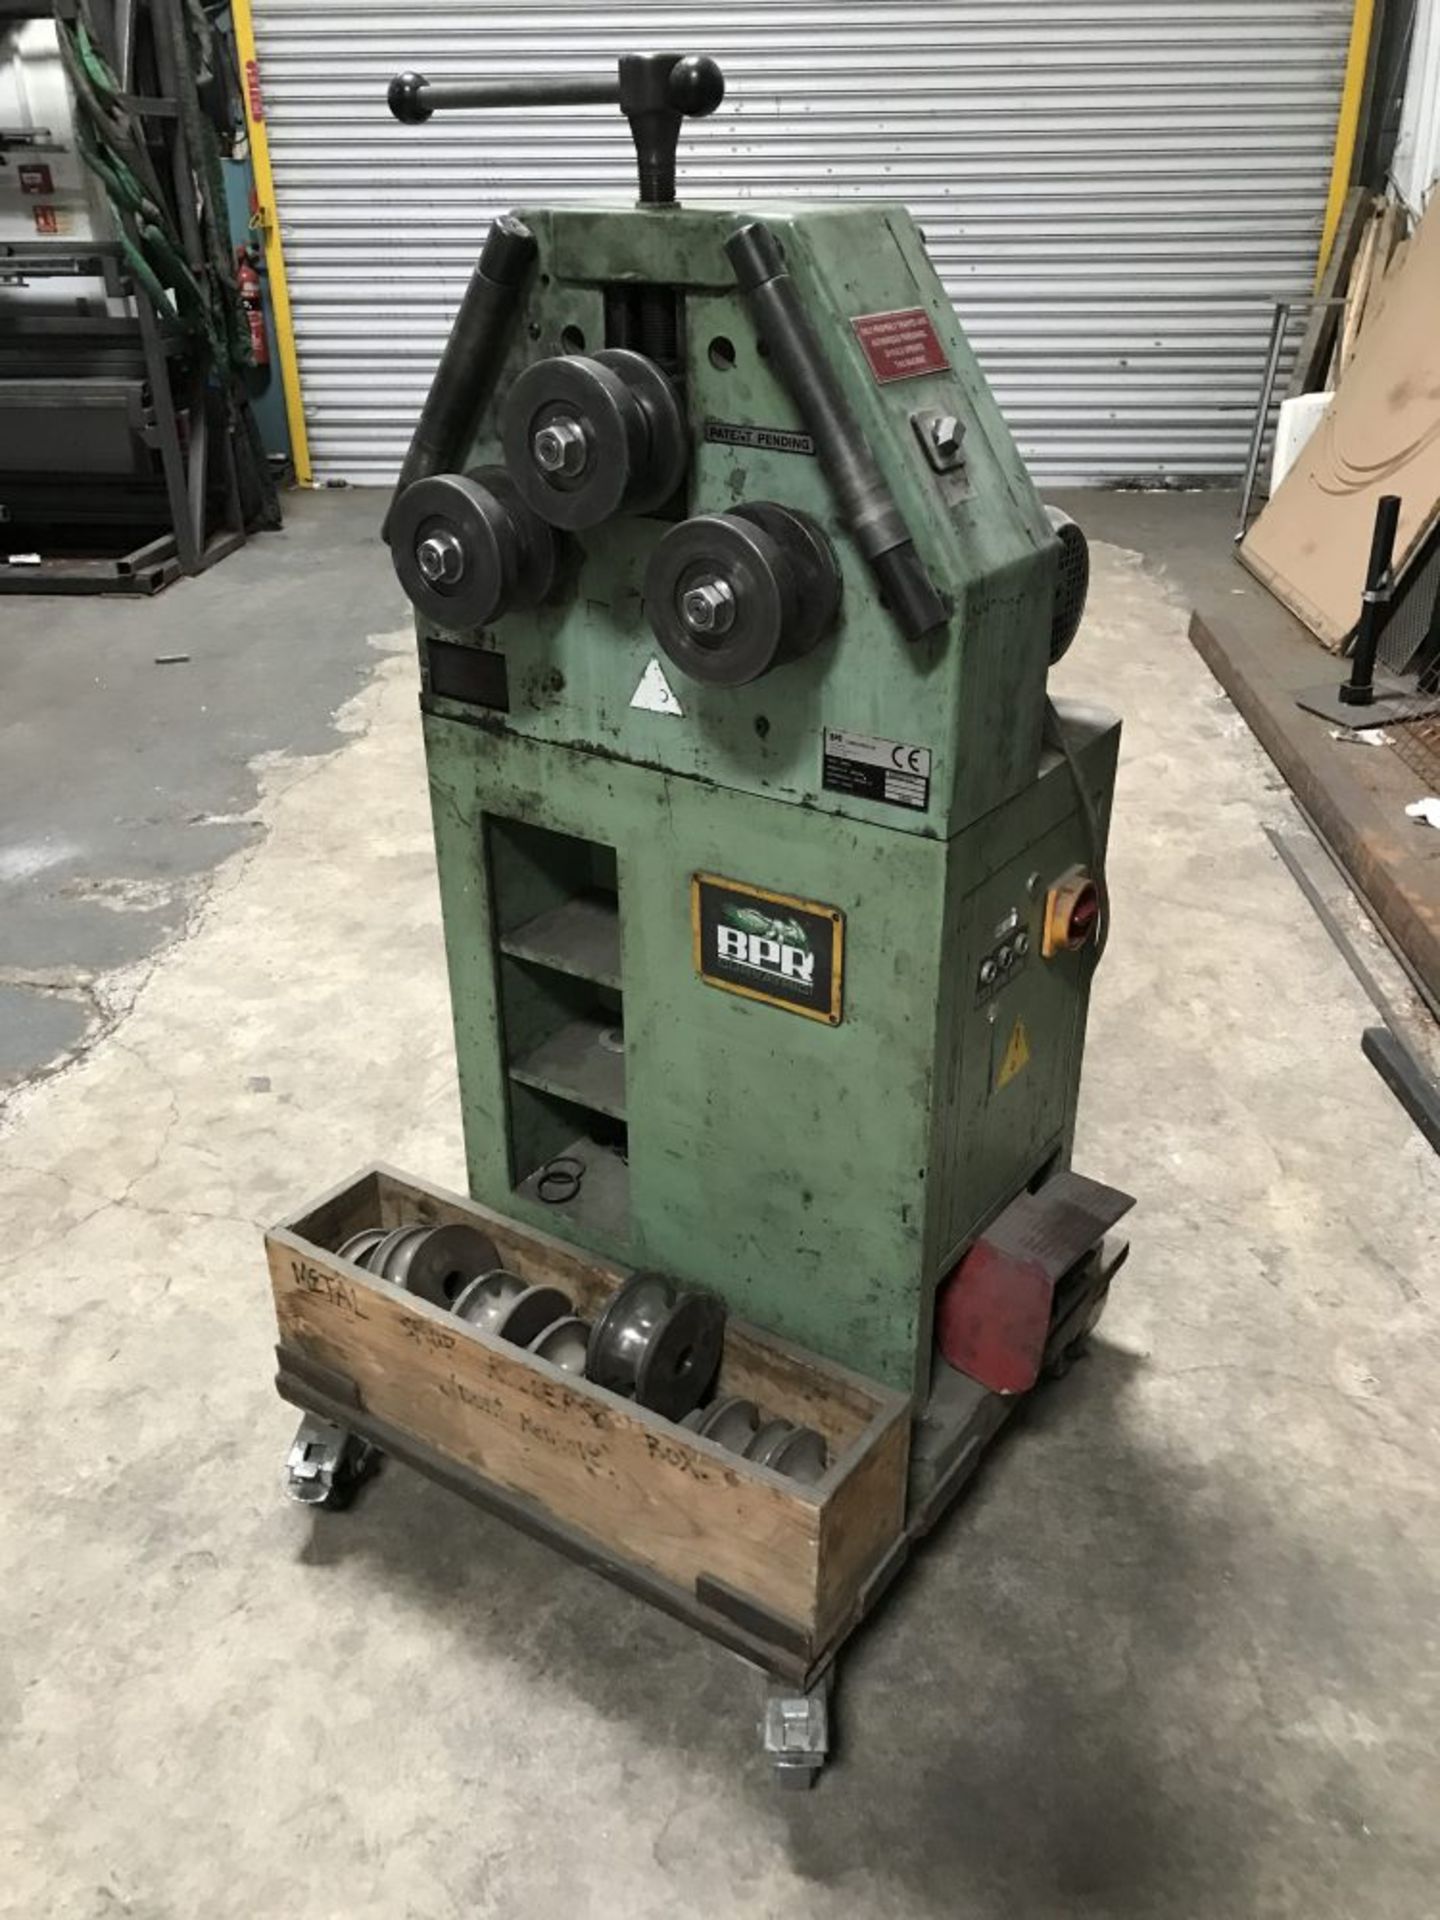 1999 BPR CP30P2V section bending rolls, serial no. 99F0018 mounted on a dolly